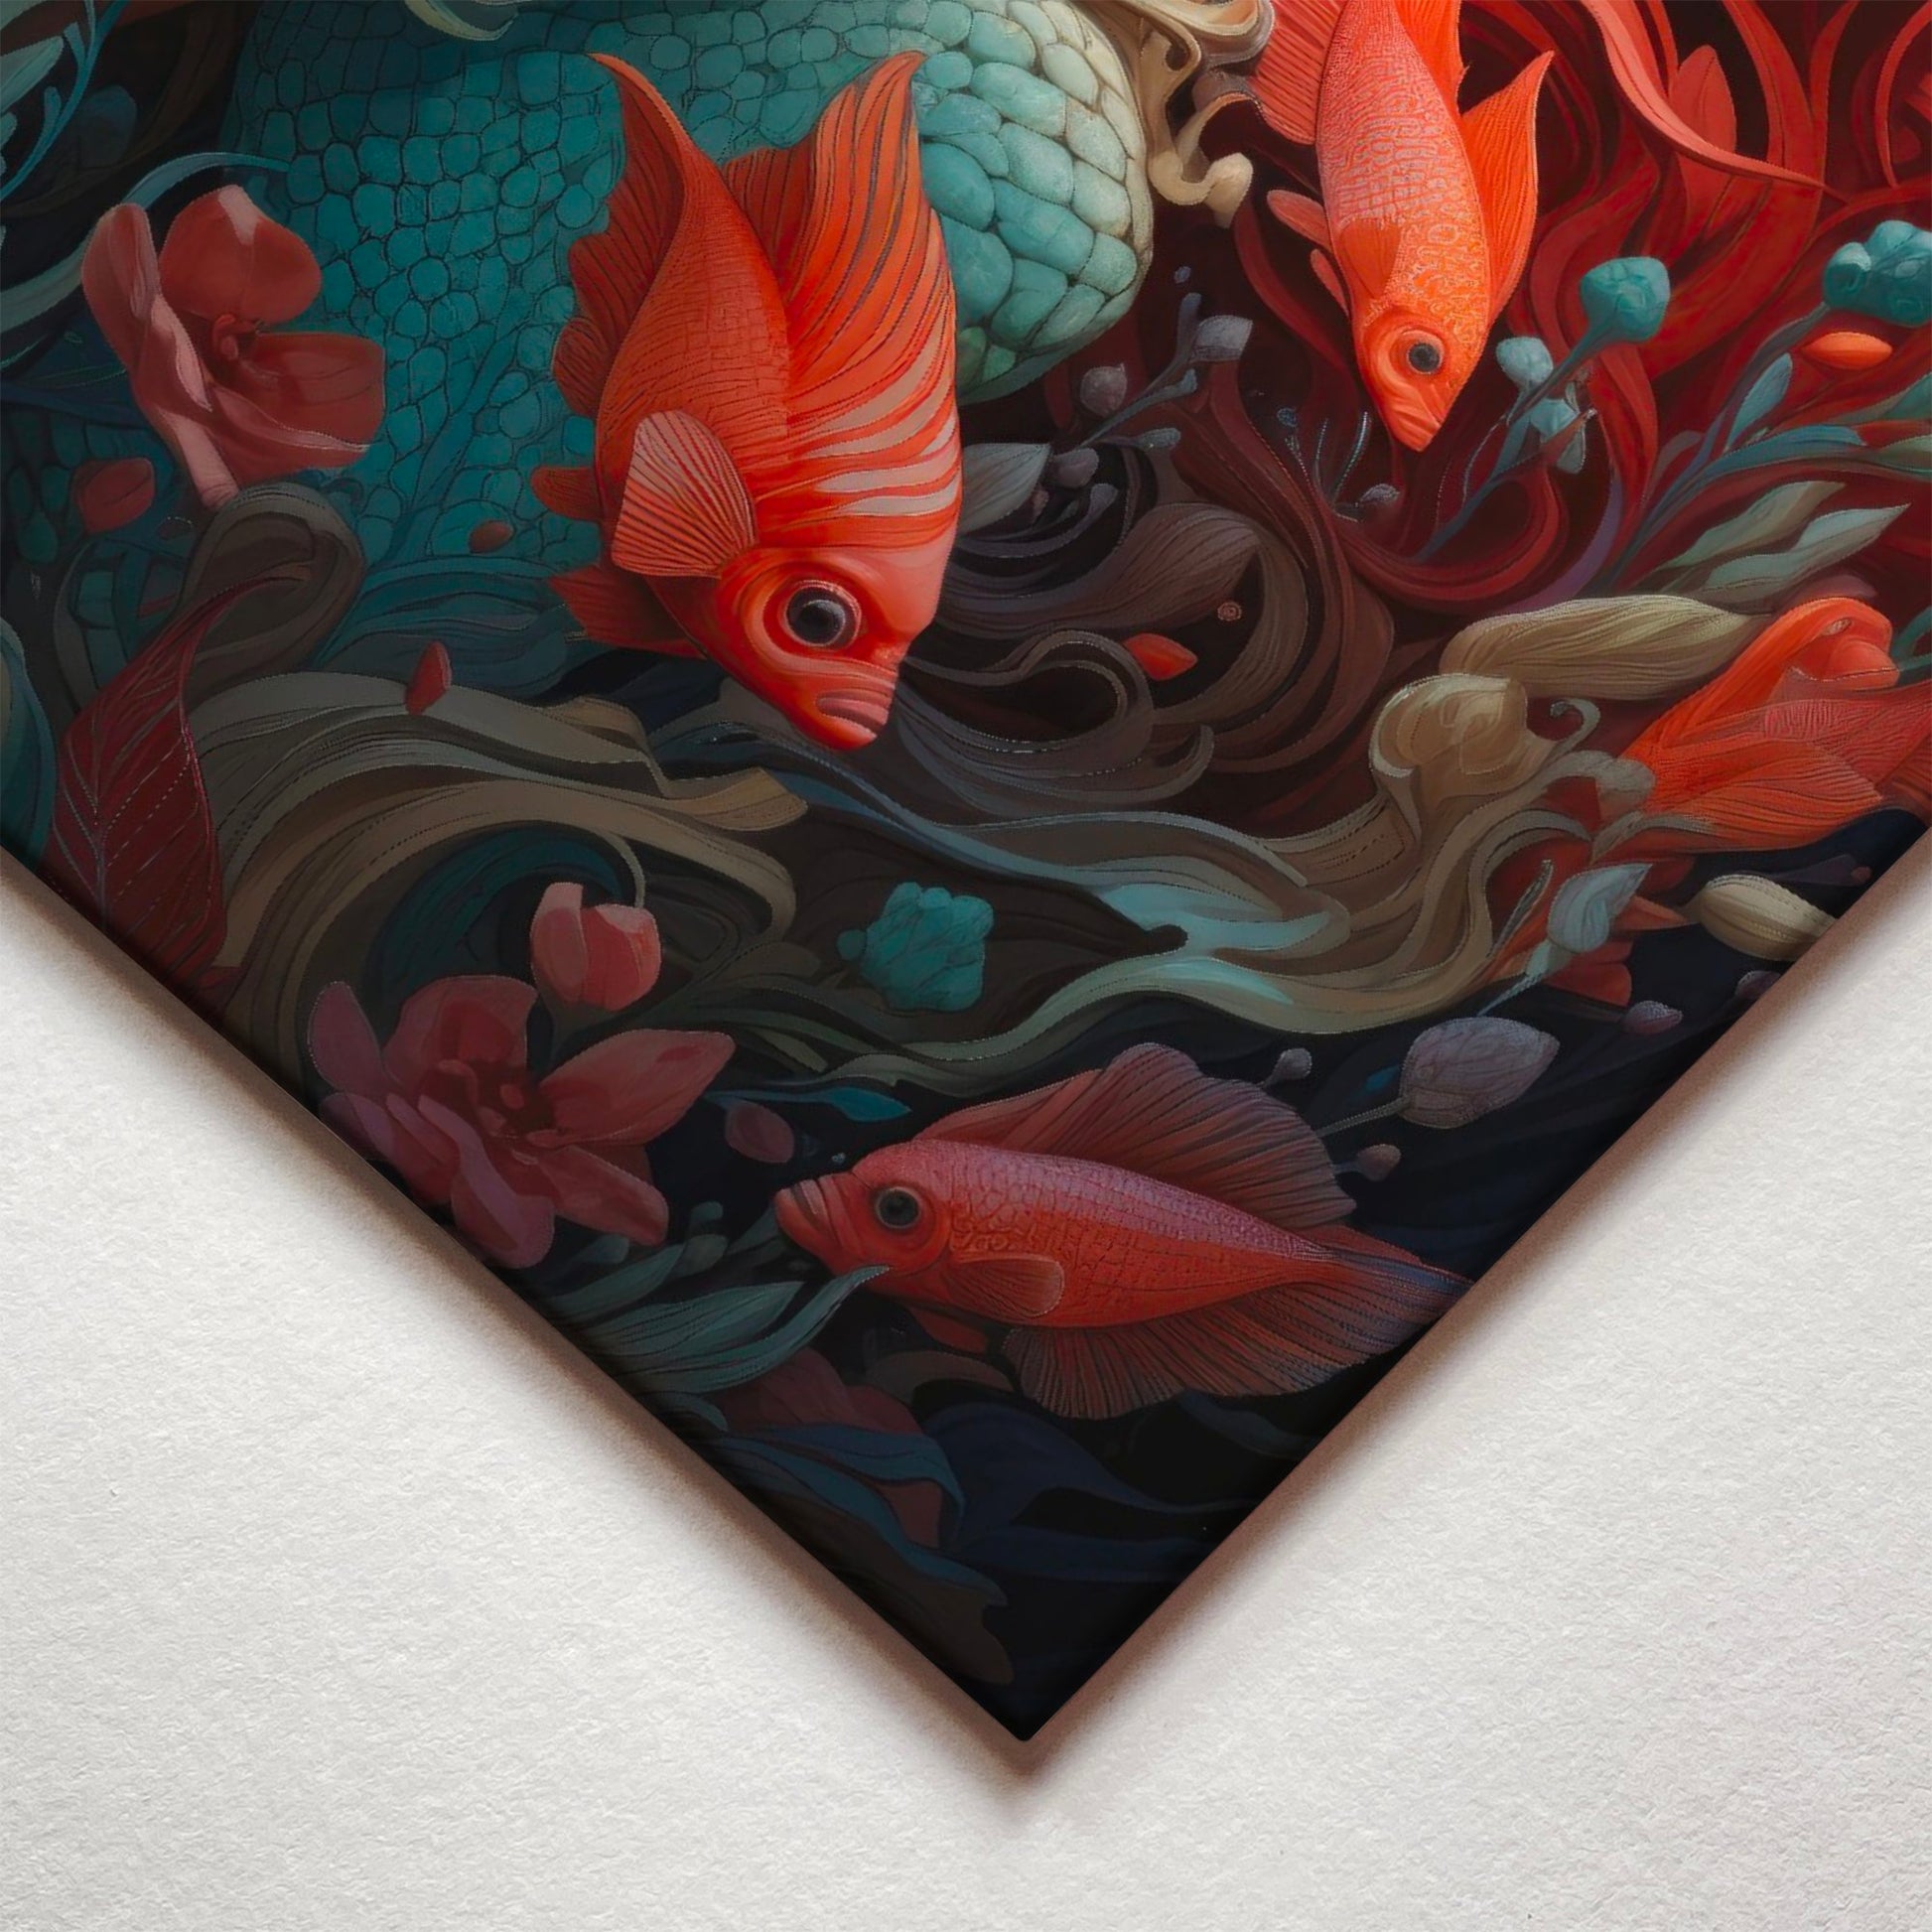 A closeup corner detail view of a metal art poster display plate with printed design of a Mermaid Fantasy Painting